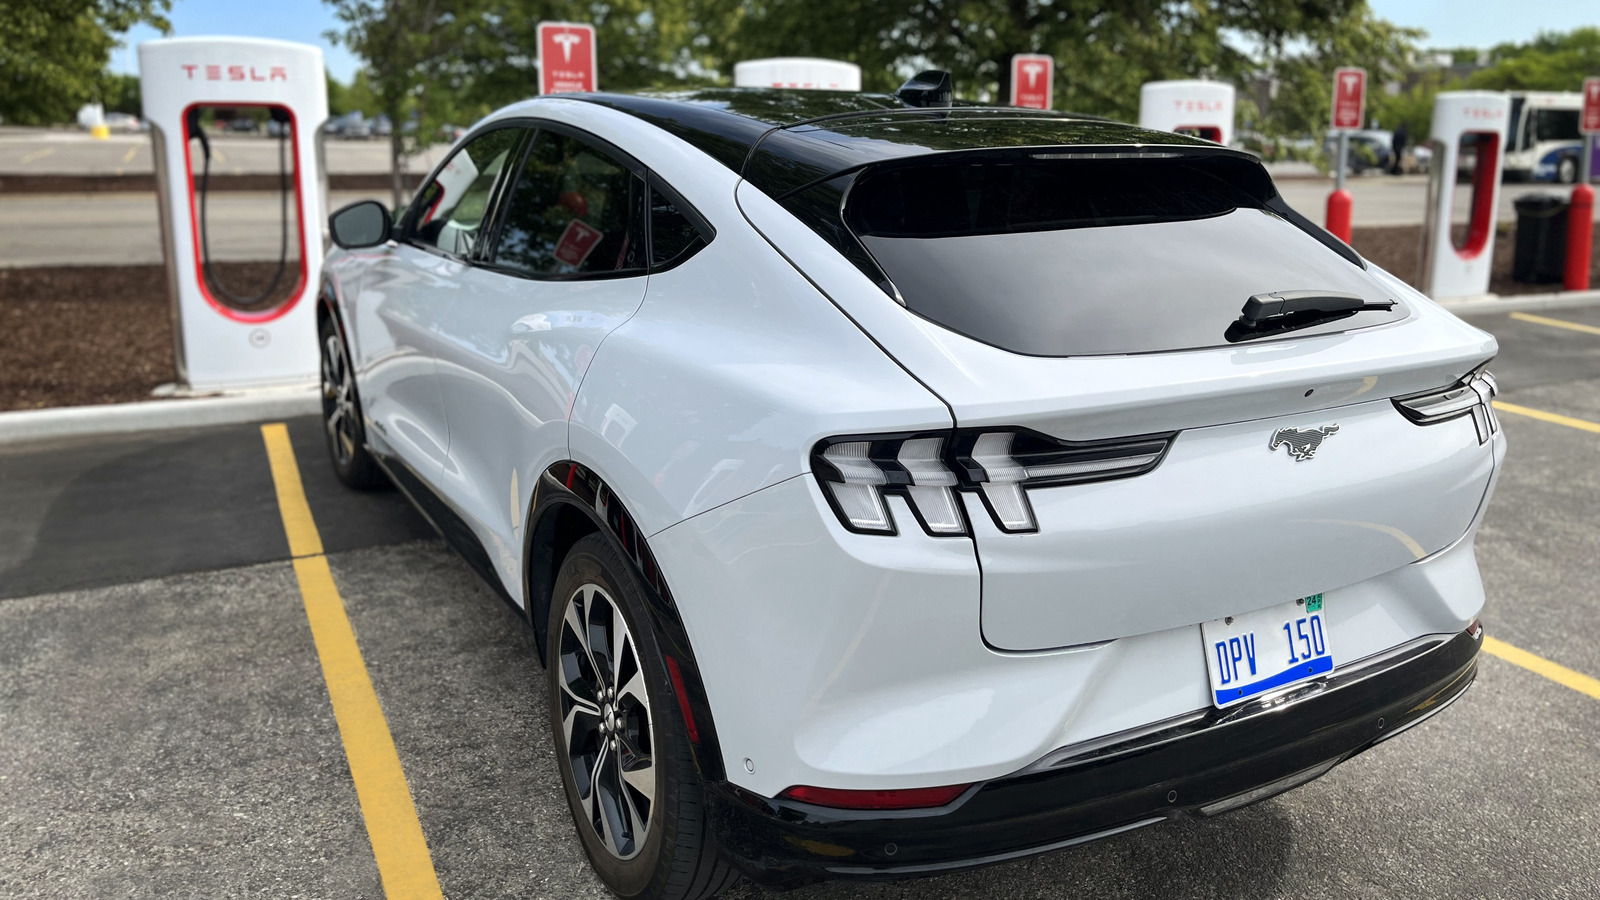 Ford's New EVs Will Get Tesla's Plug For Supercharger Access From 2024